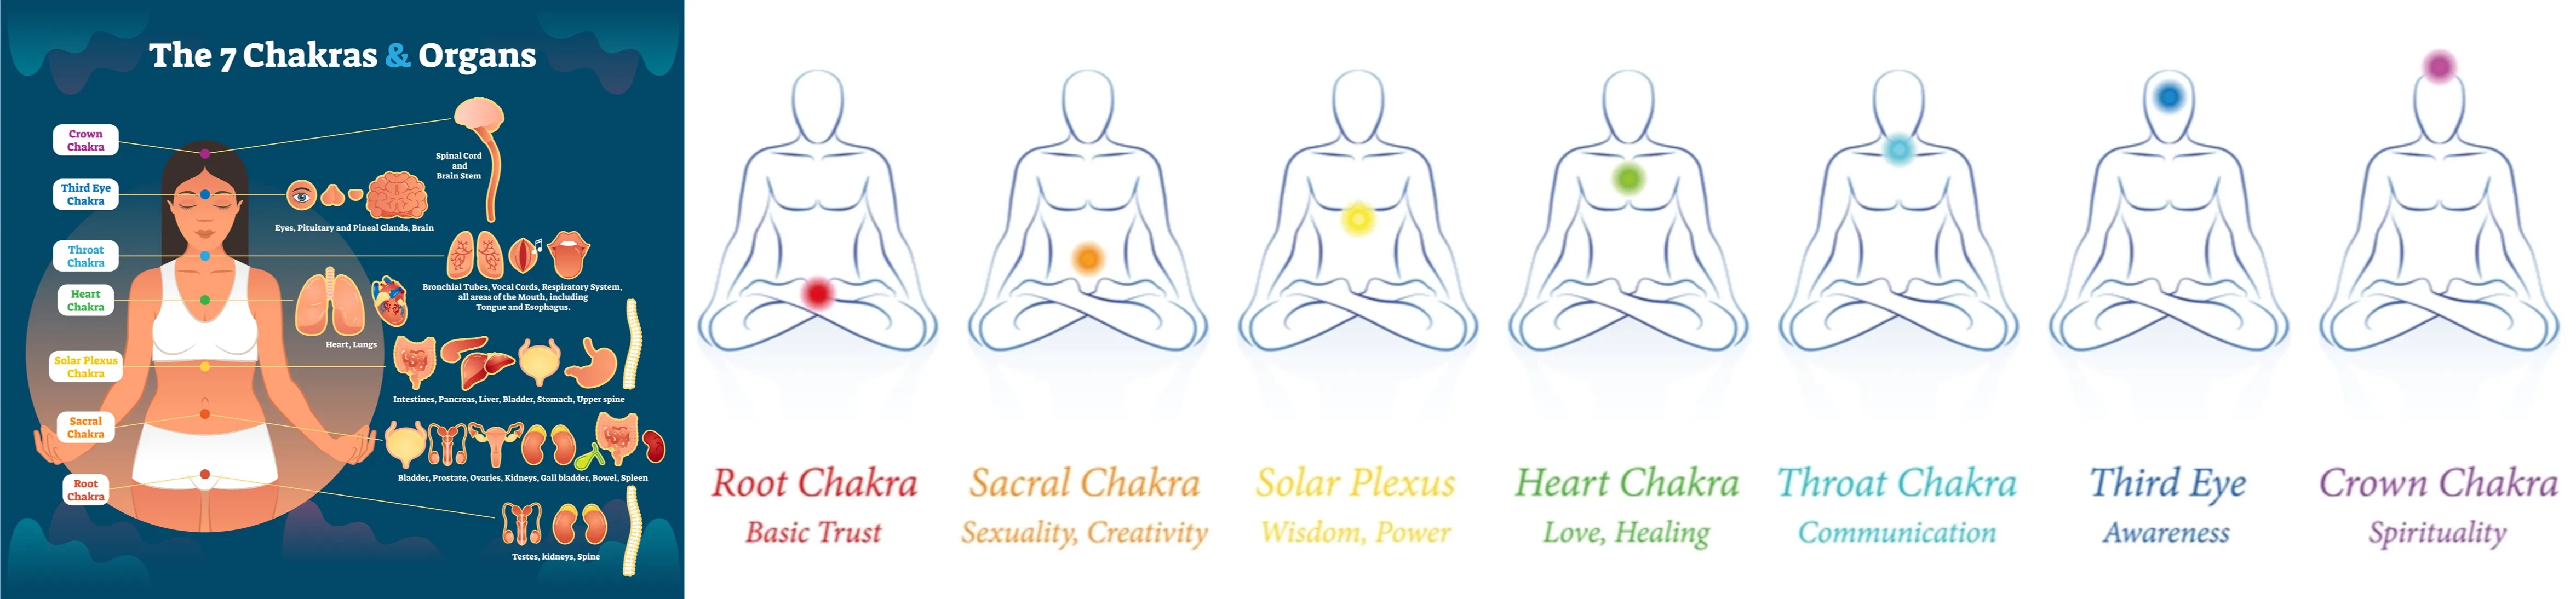 The seven human Chakras (Energy Centers) and organs represent respective influential emotions.